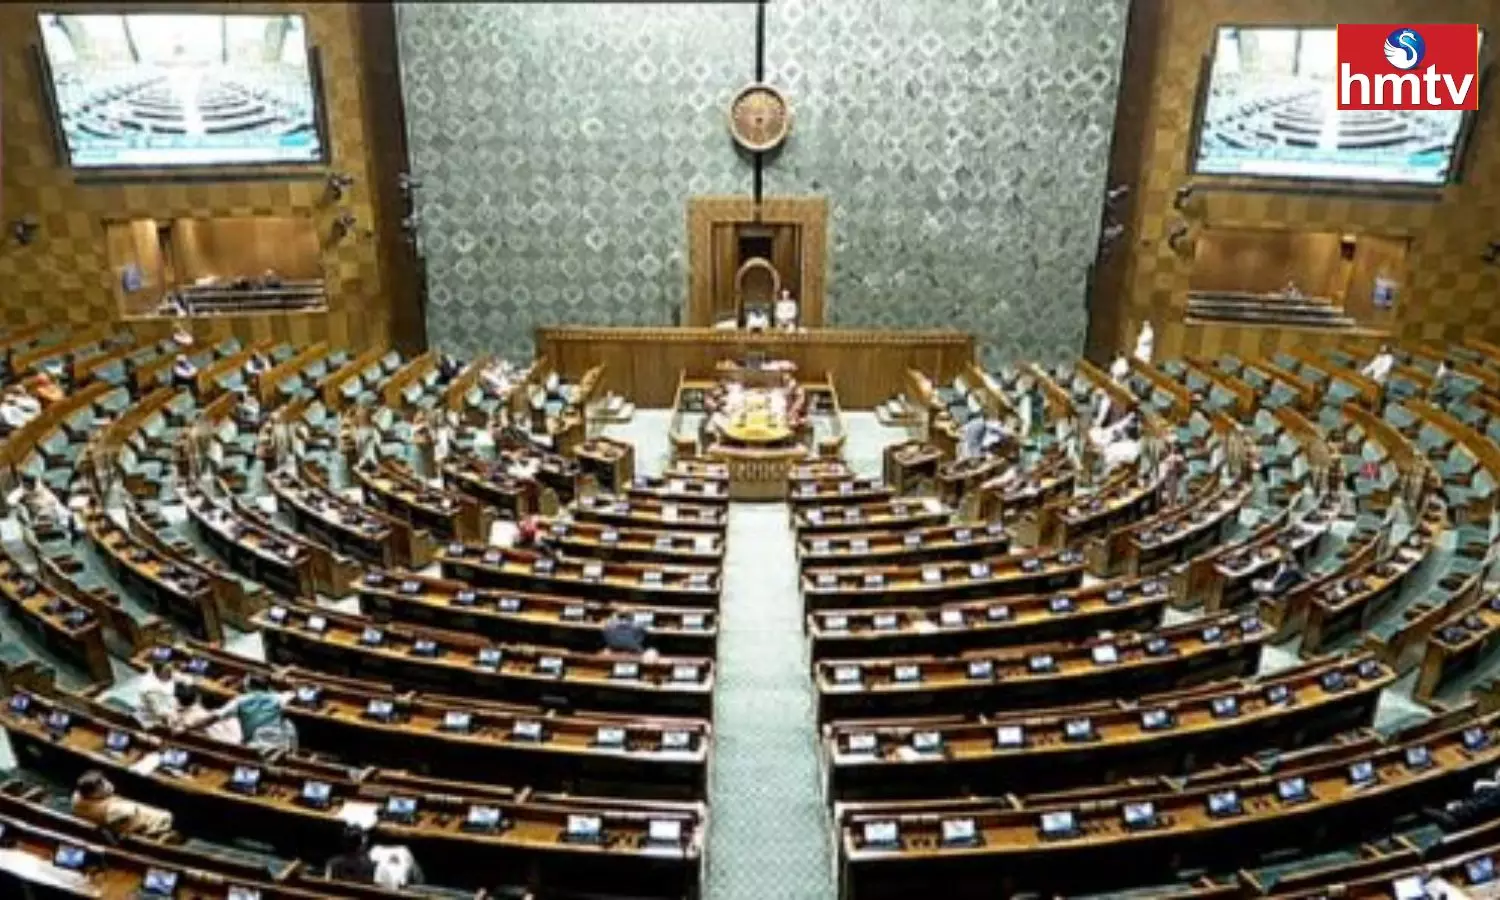 The Budget Meetings of the Parliament will end today